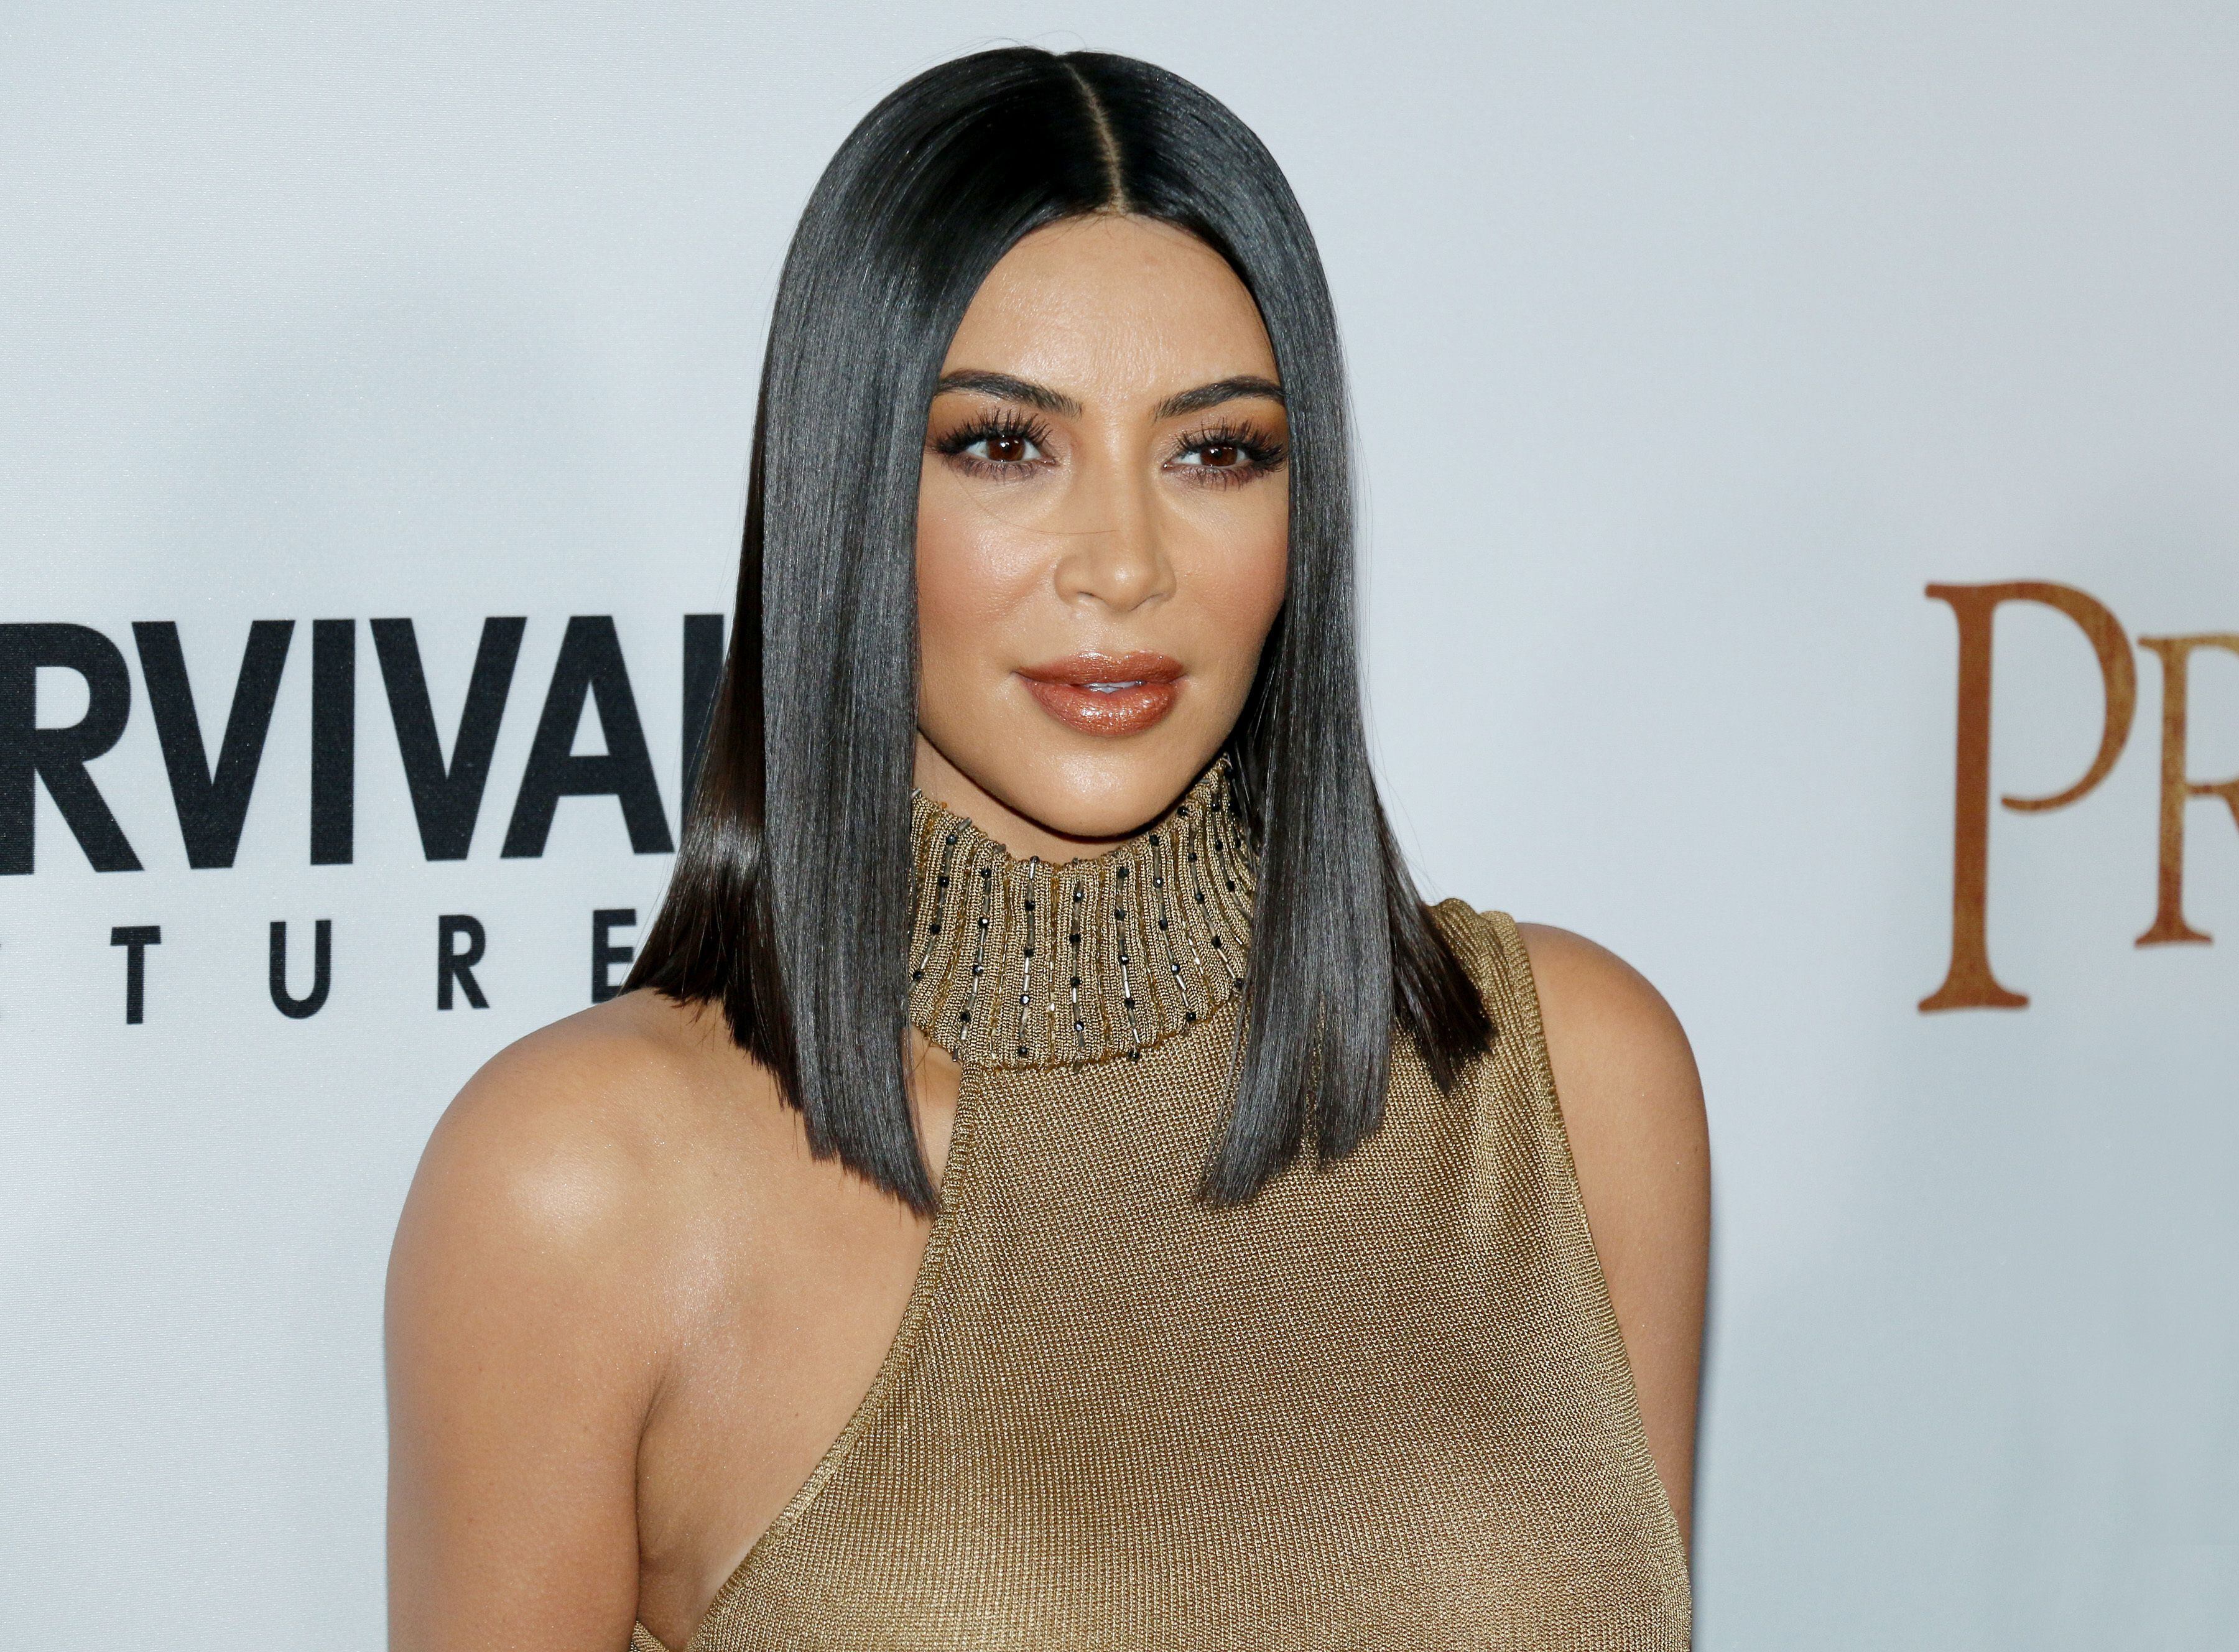 Kim Kardashian, other celebs promise big crypto gains. A new study says they mislead investors